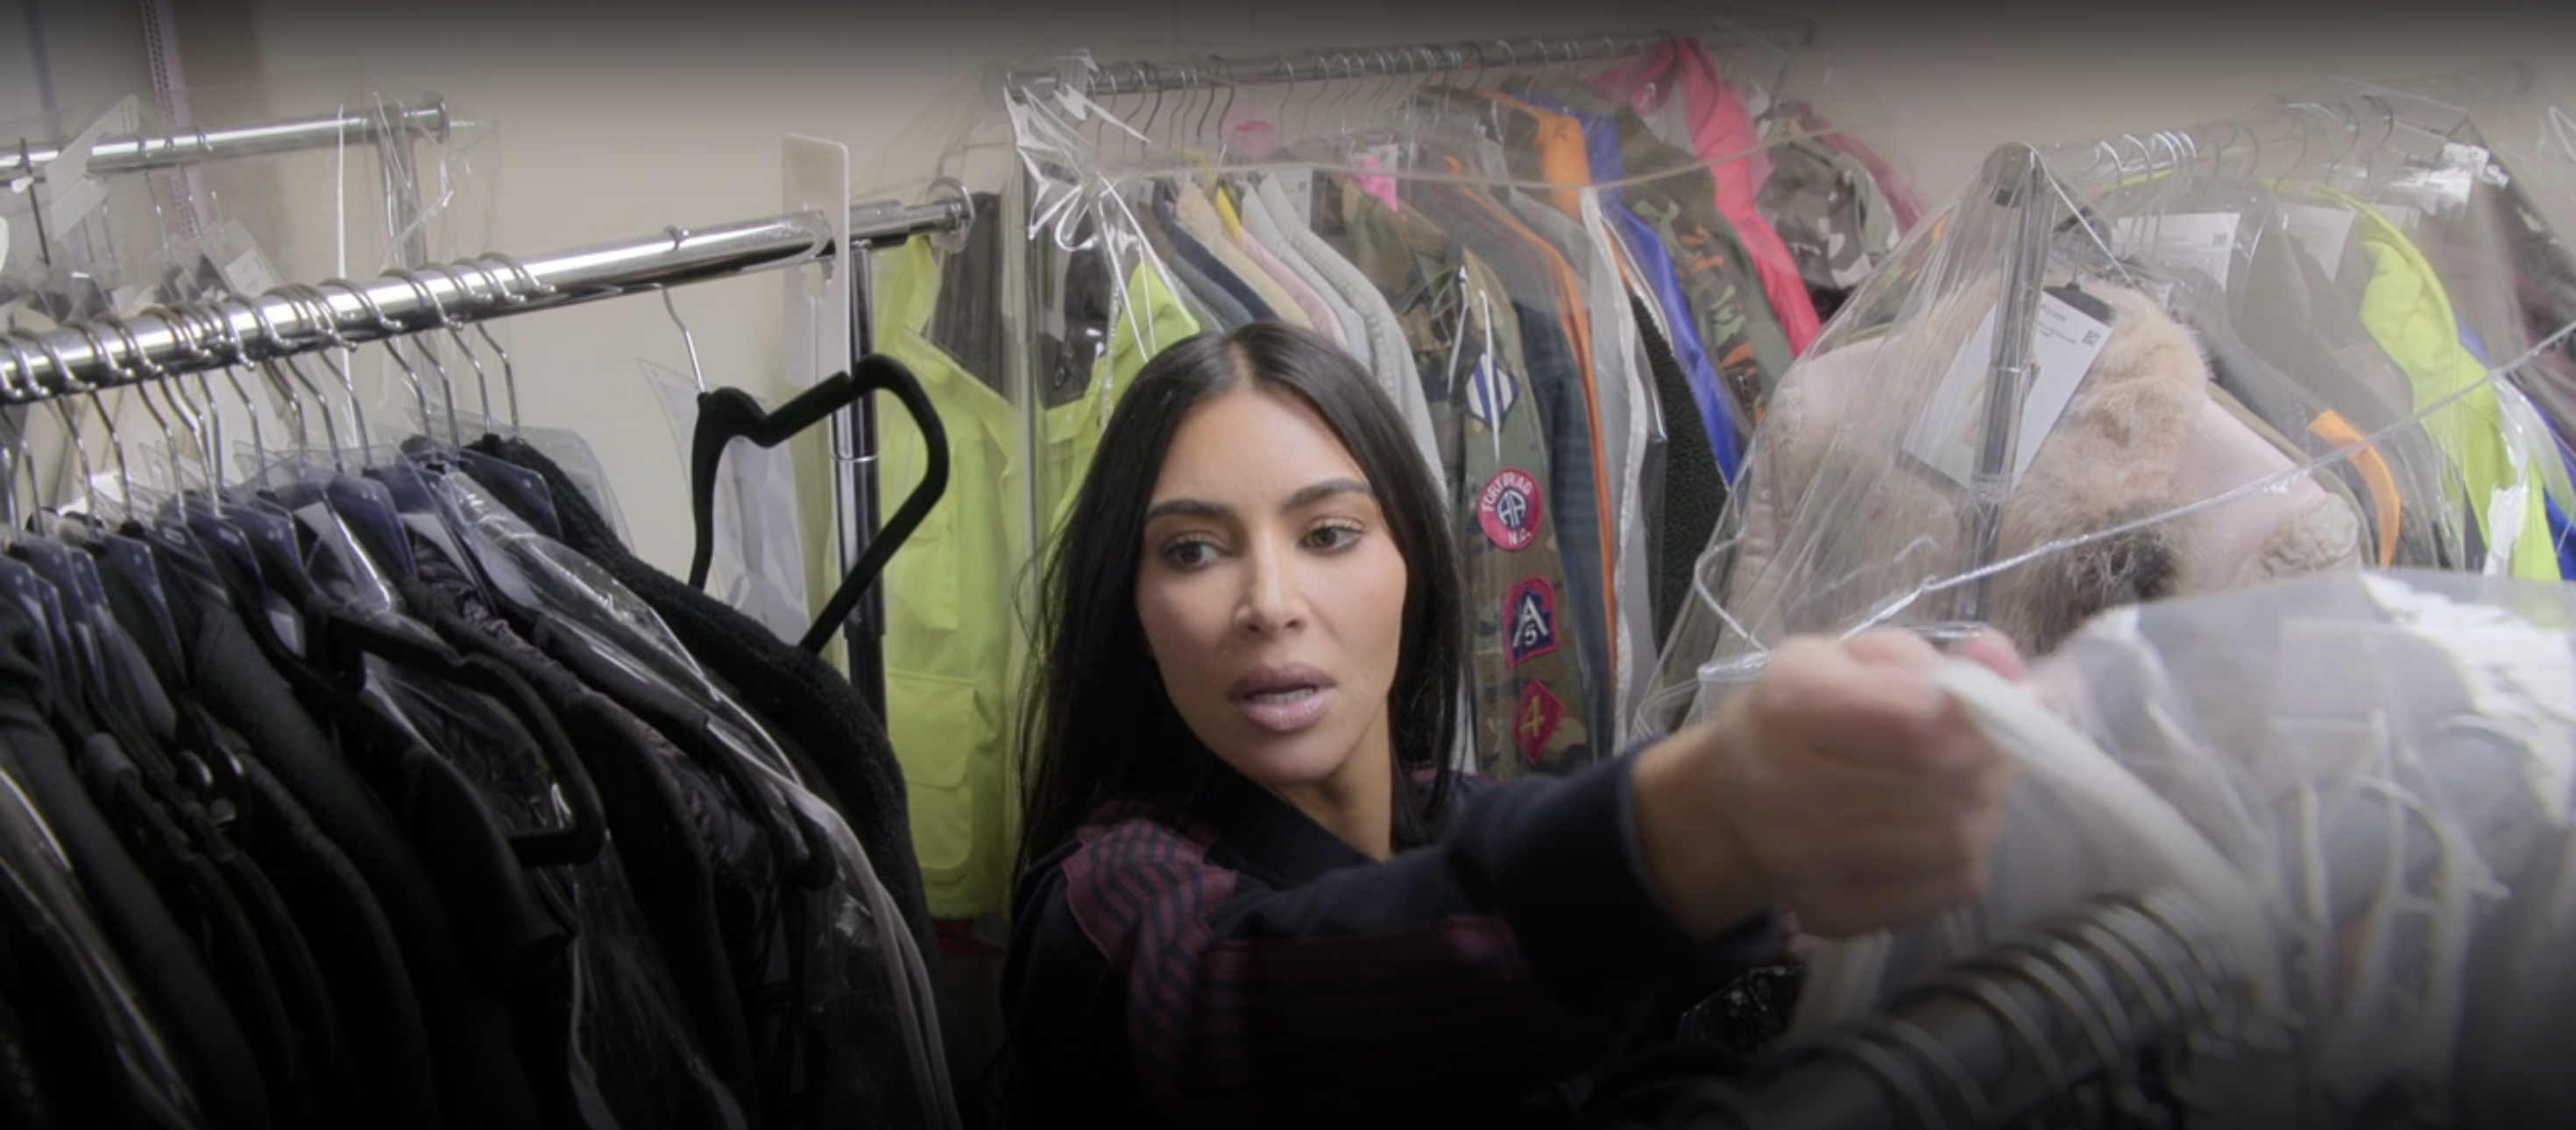 Kim Kardashian surrounded by her clothes